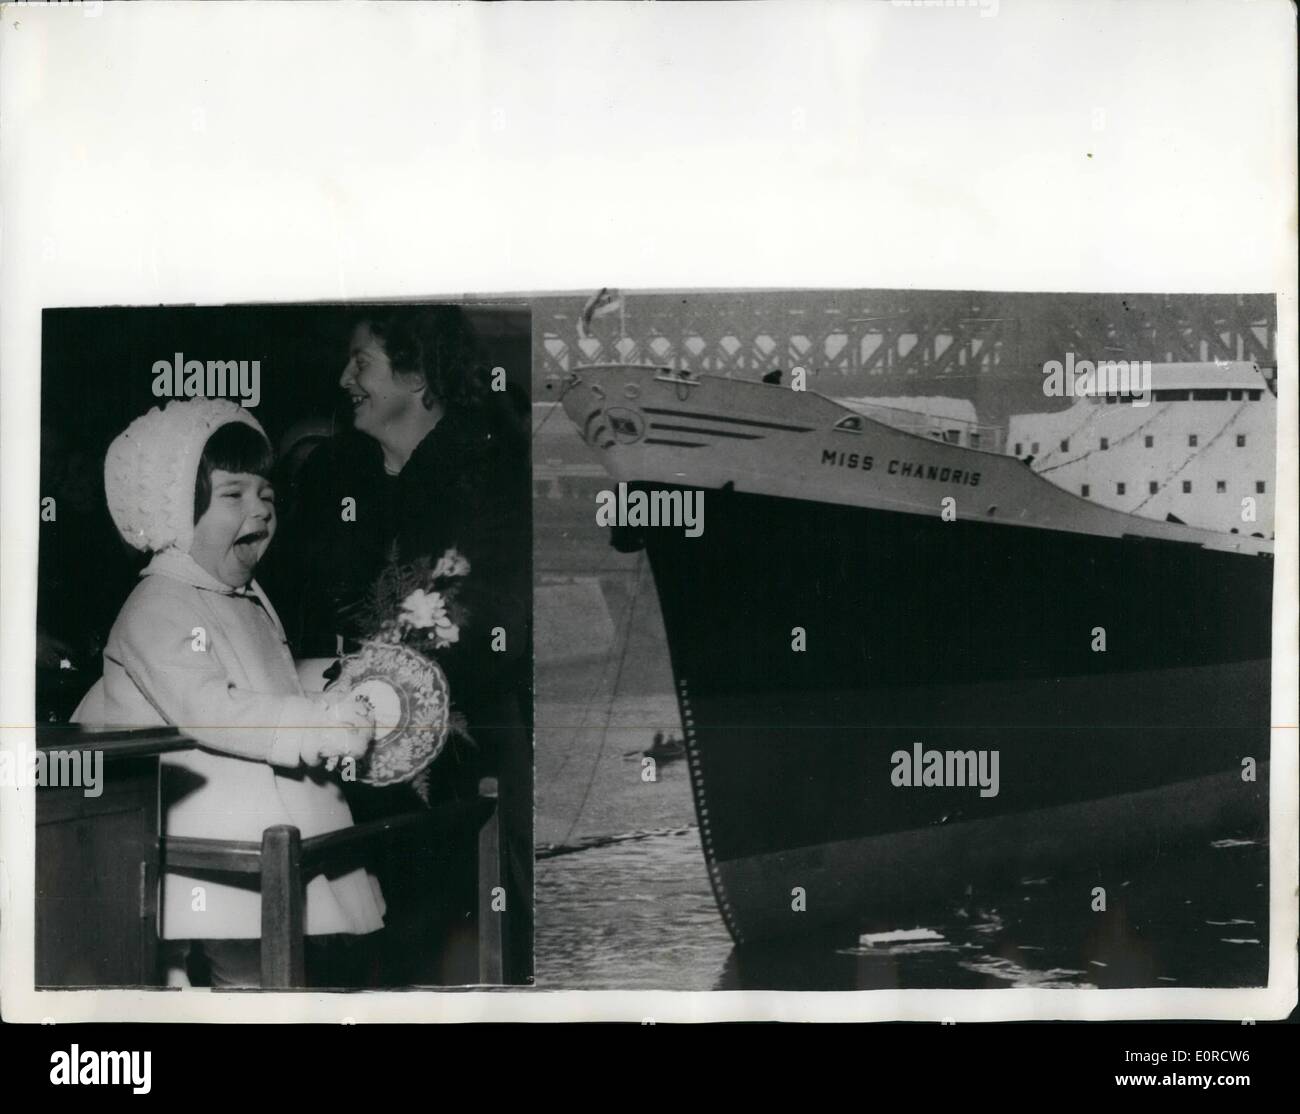 Mar. 03, 1959 - Eugenia Launches A Cargo Ship-And She Is Not yet Two Years Old: Twenty months old Eugenia Chandris yesterday performed the ceremony of launching the 11,000 ton Cargo ship ''Miss Chandris''-at Sunderland. Eugenia is the daughter of Mr. Demetrius Chandris-partne of the shipping company's London Agents-and she is the youngest person ever to launch a ship-at Sunderland. Photo shows. The vessel slides into the water-as she is launched by a happy twenty months old Eugenia Chandris-in Sunderland. Stock Photo